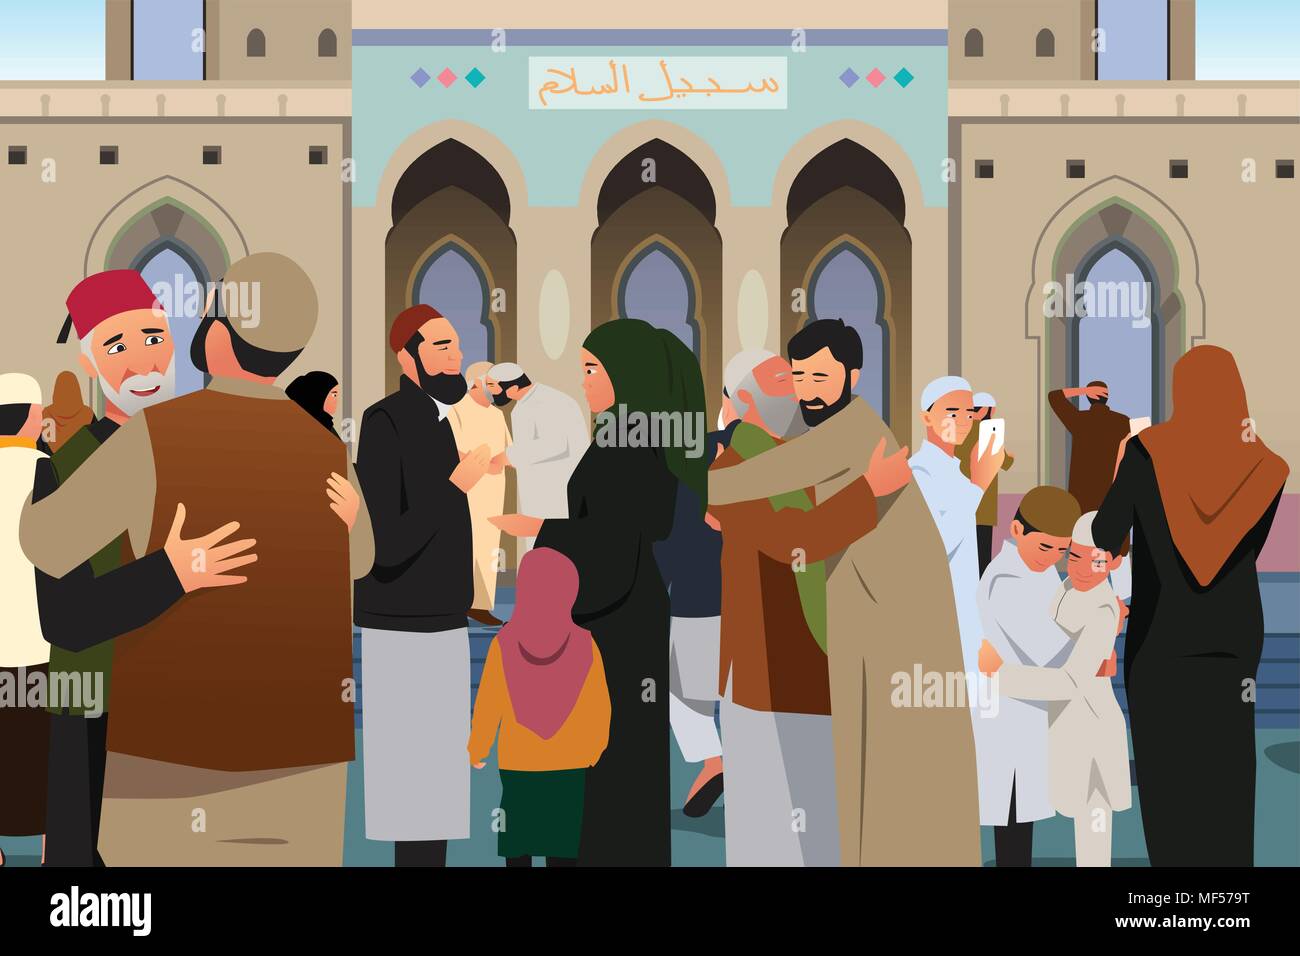 A vector illustration of Muslims Embracing Each Other After Prayer in Mosque Stock Vector